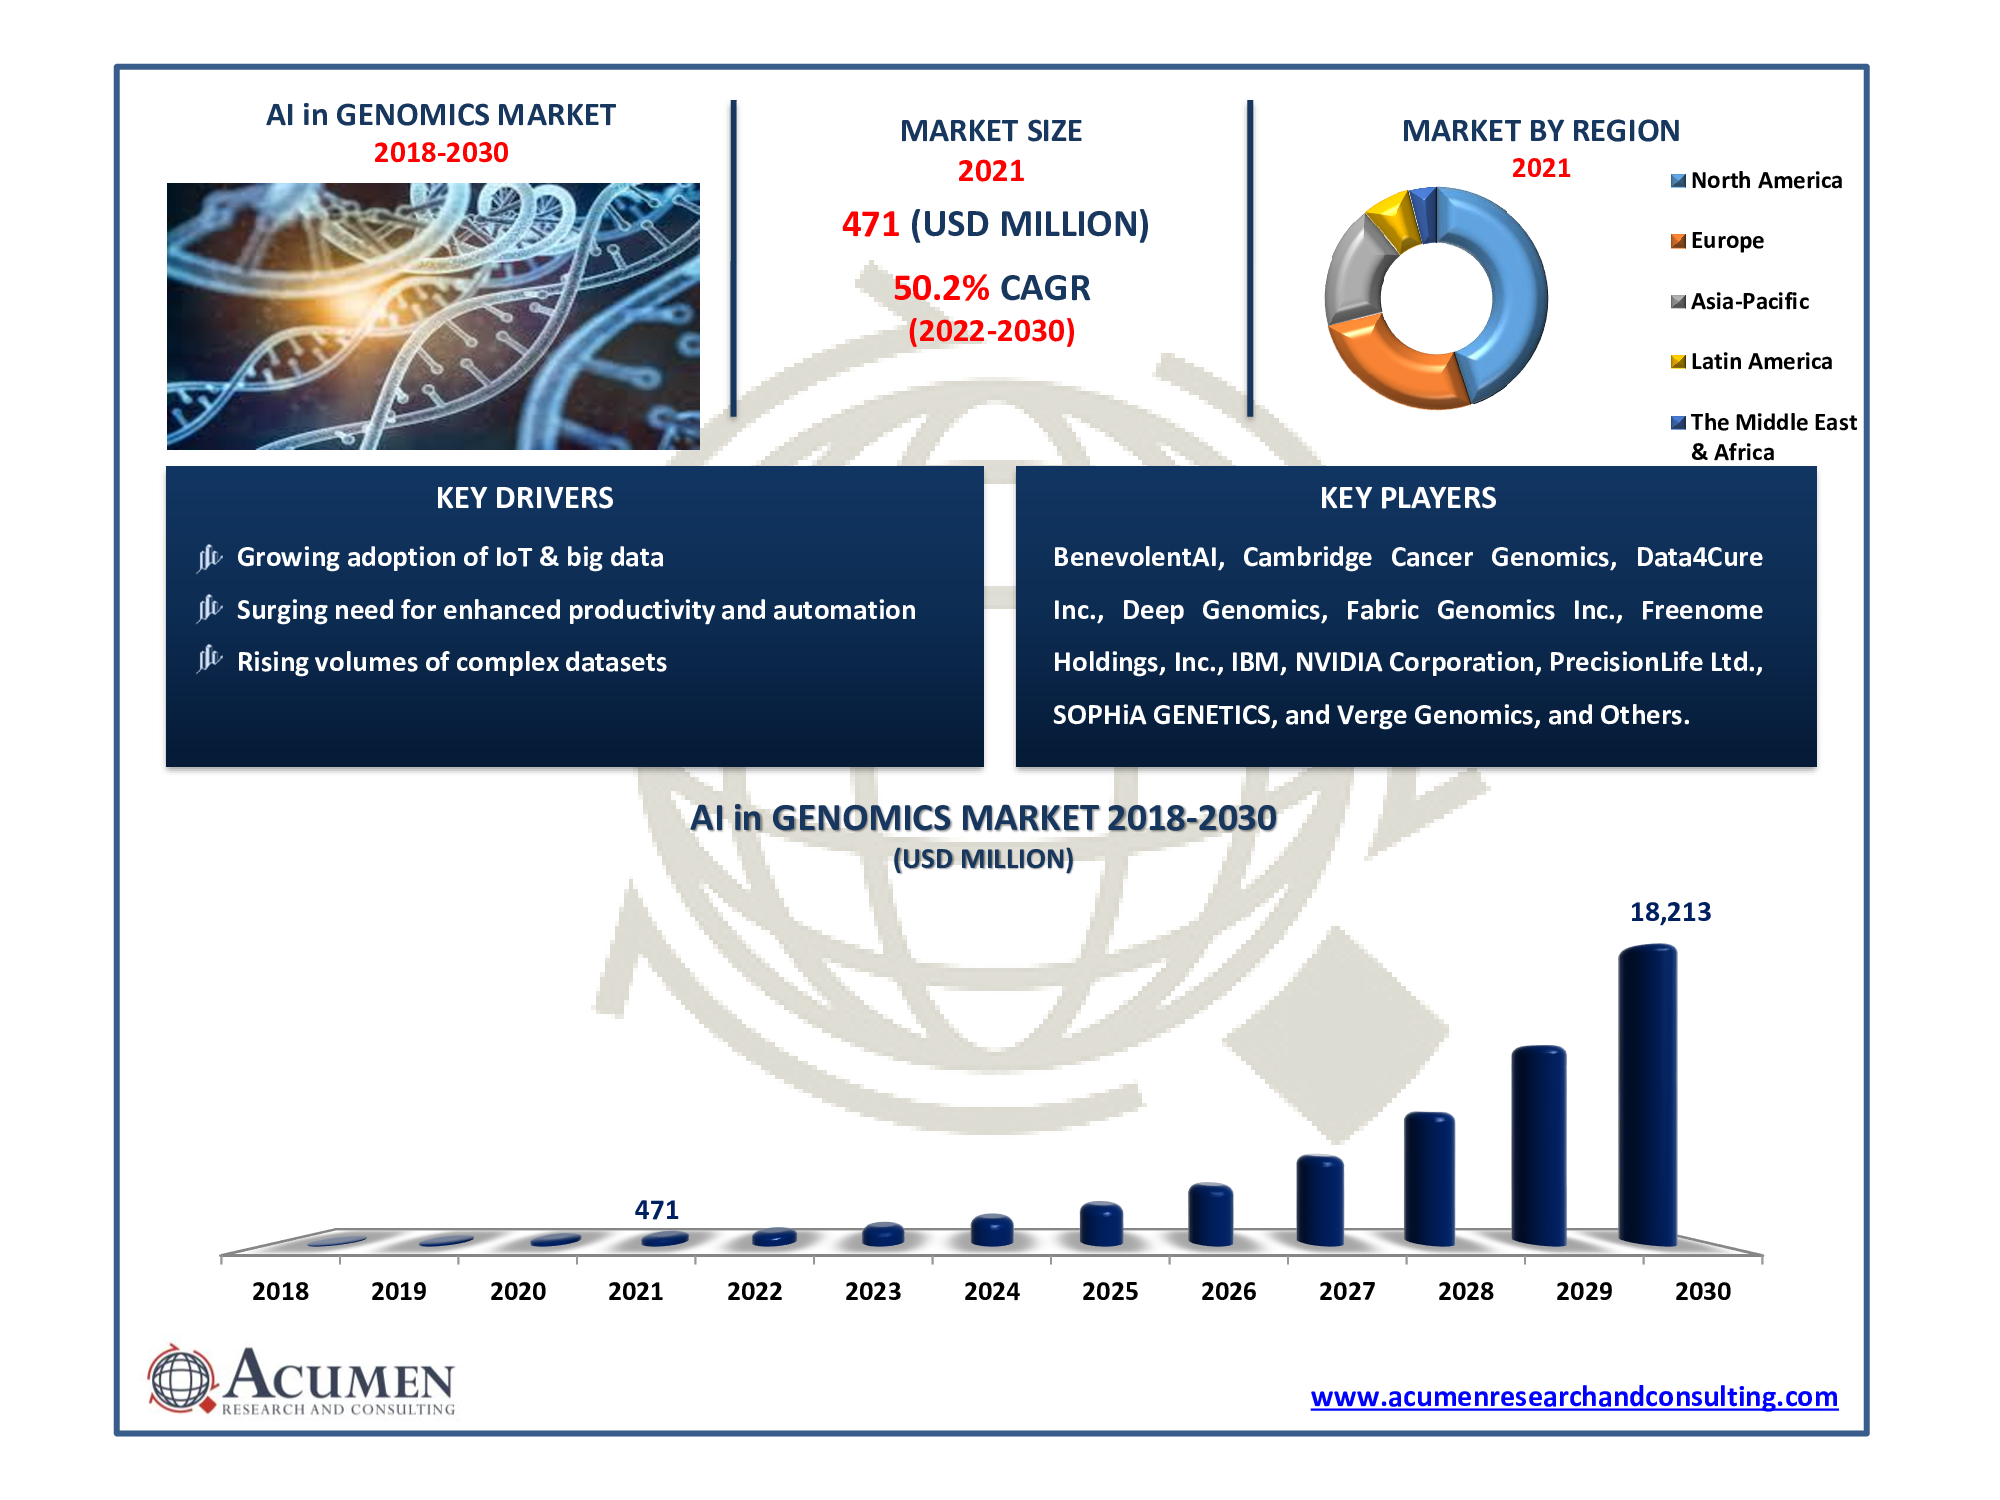 Artificial Intelligence in Genomics Market size accounted for USD 471 Million in 2021 and is estimated to reach USD 18,213 Million by 2030.